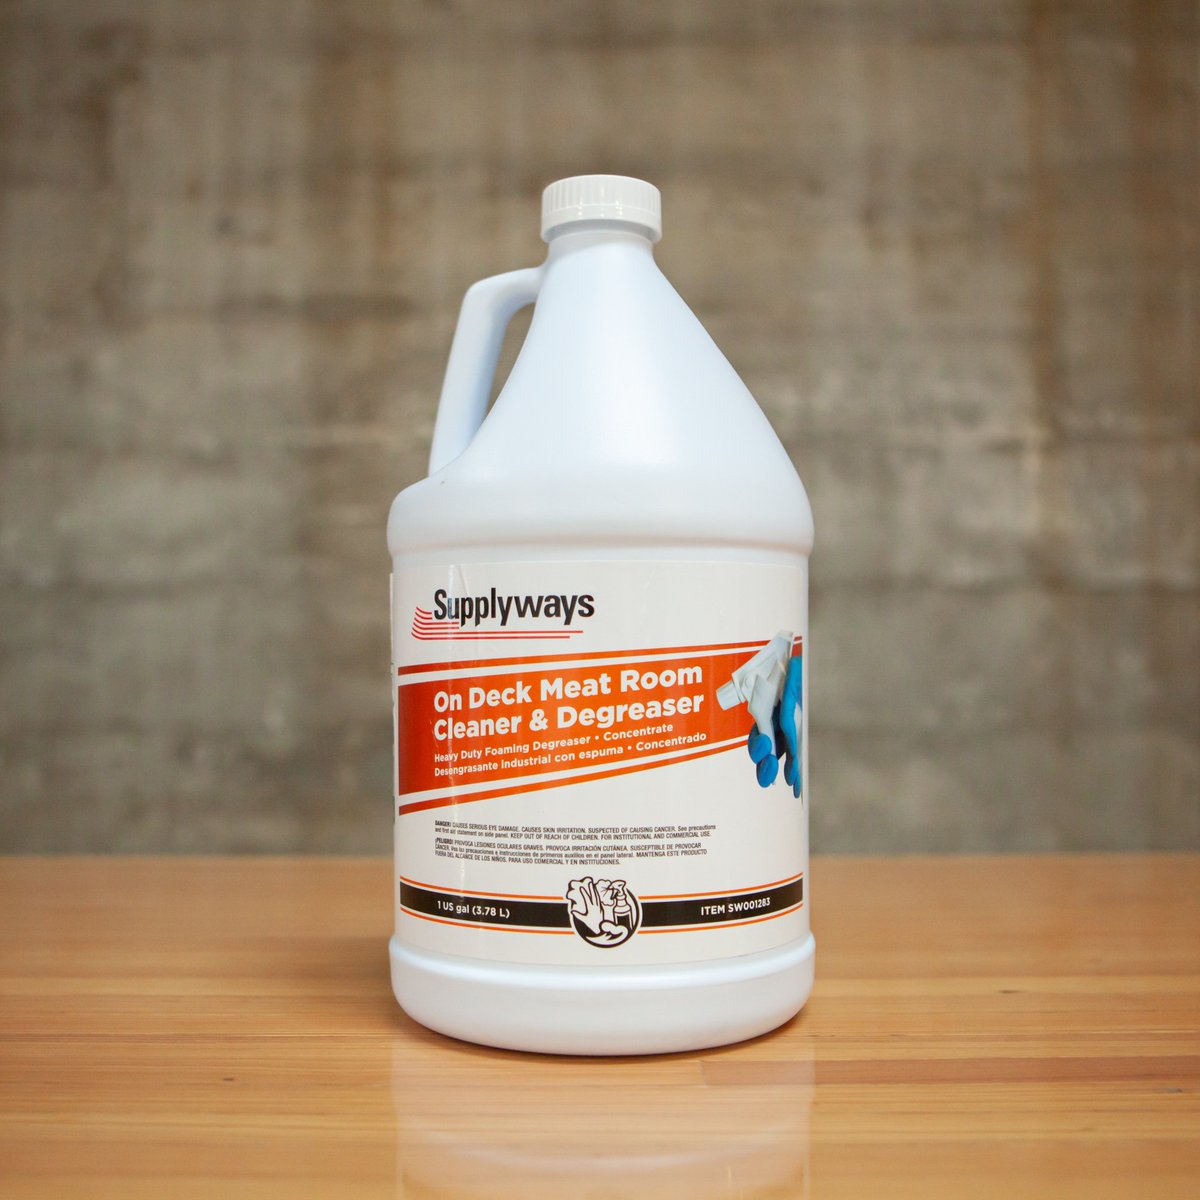 Keep it clean! Our new Supplyways Degreaser is perfect for the job. wcpsolutions.com/product/facili… #wcpsolutions #supplyways #cleaningsupplies #janitorial #cleaning #cleaningchemicals